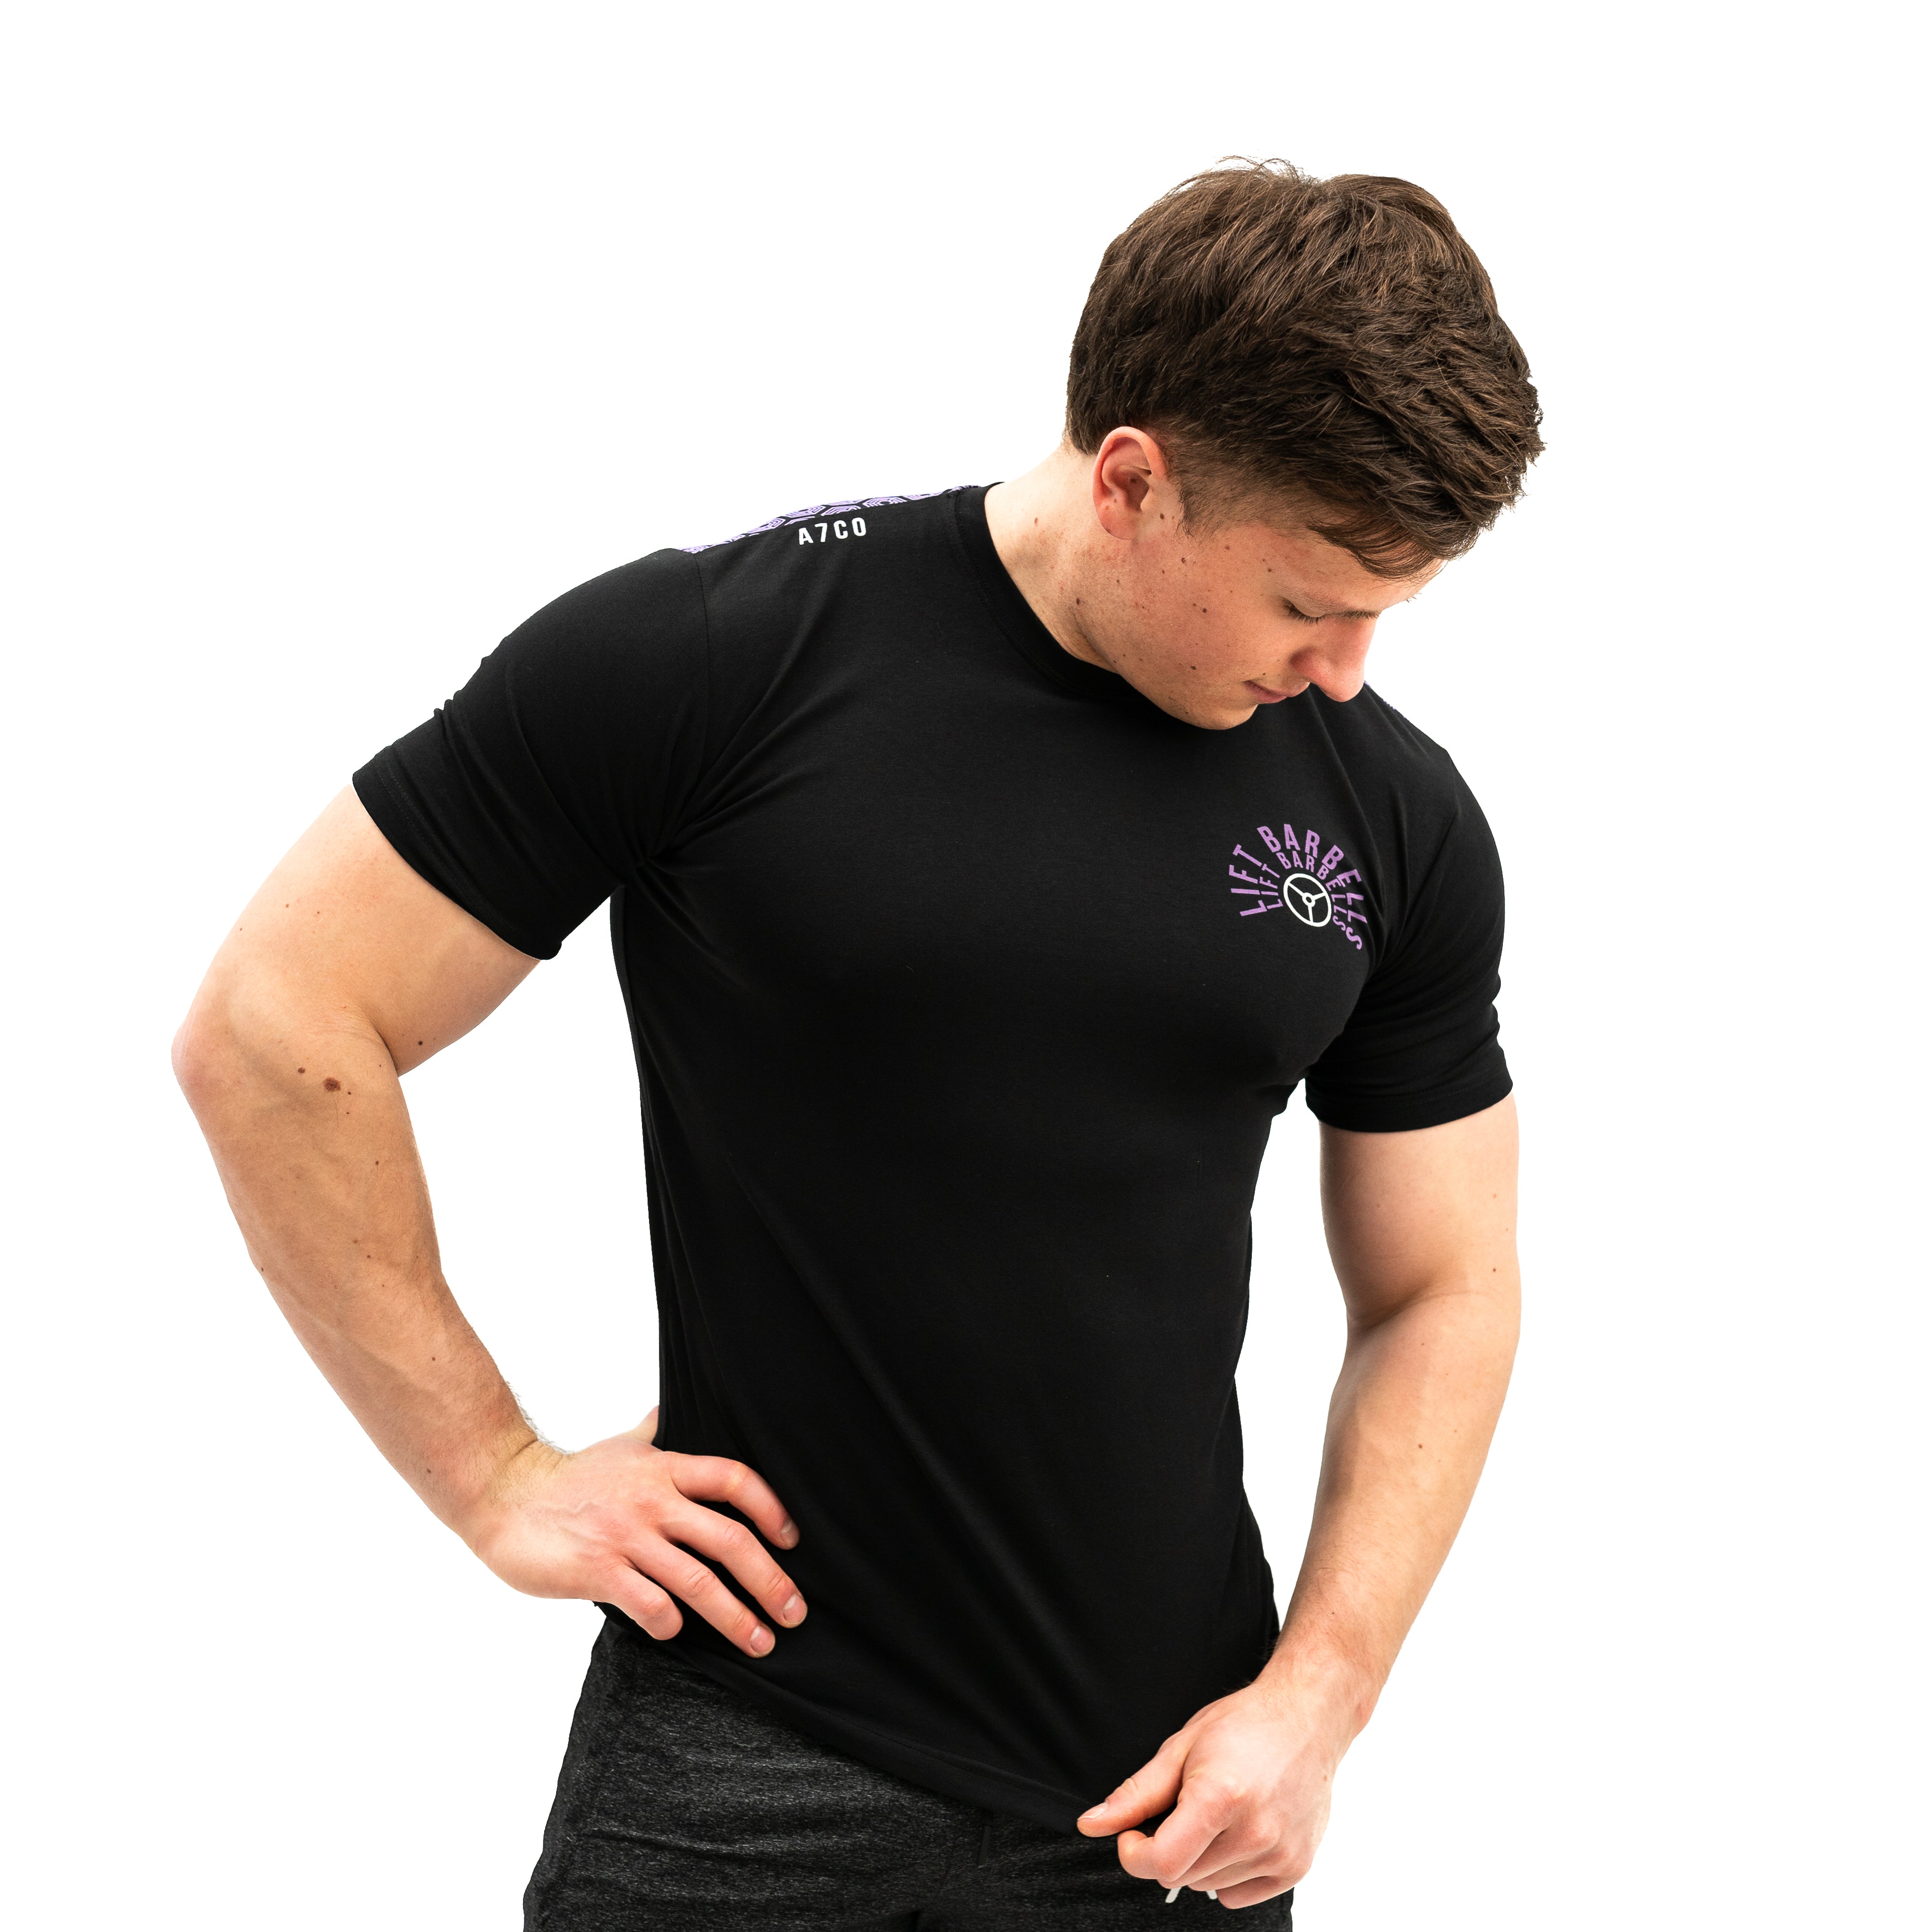 Lilac Dream Bar Grip T-shirt, great as a squat shirt. Purchase Lilac Dream Bar Grip Shirt from A7 UK. Purchase Lilac Dream Bar Grip Shirt Europe from A7 Europe. No more chalk and no more sliding. Best Bar Grip T shirts, shipping to UK and Europe from A7 UK. Lilac Dream Bar Grip Shirt includes. A7UK has the best Powerlifting apparel for all your workouts. Available in UK and Europe including France, Italy, Germany, the Netherlands, Sweden and Poland.